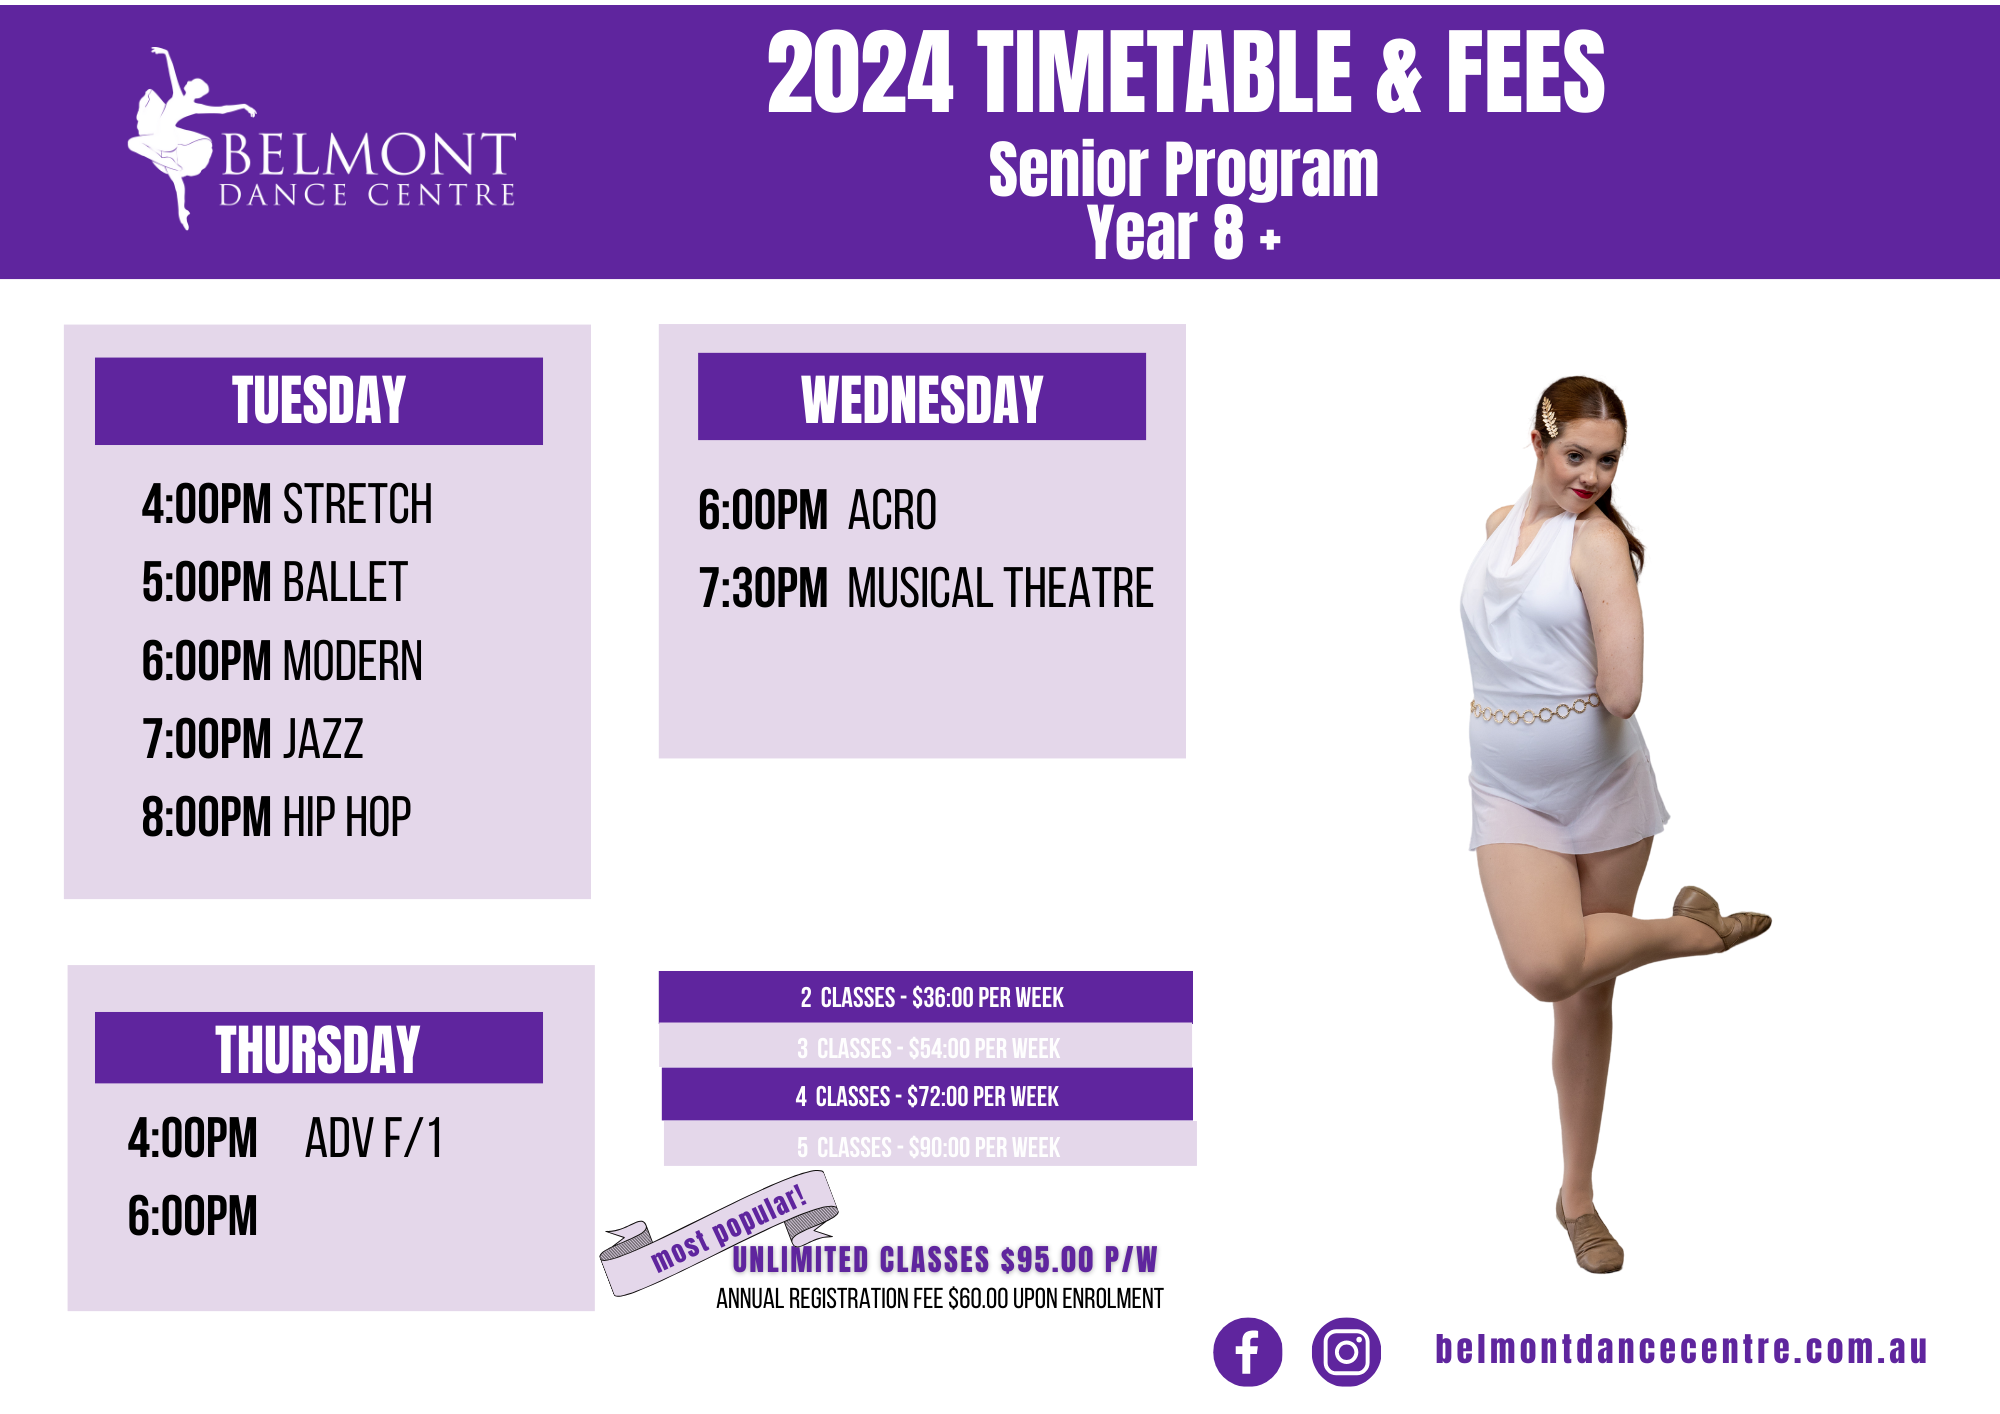  Everyone can learn to dance at Belmont Dance Centre in Belmont, NSW. Embrace the joy, rhythm, and inclusivity of dance education in our welcoming studio!